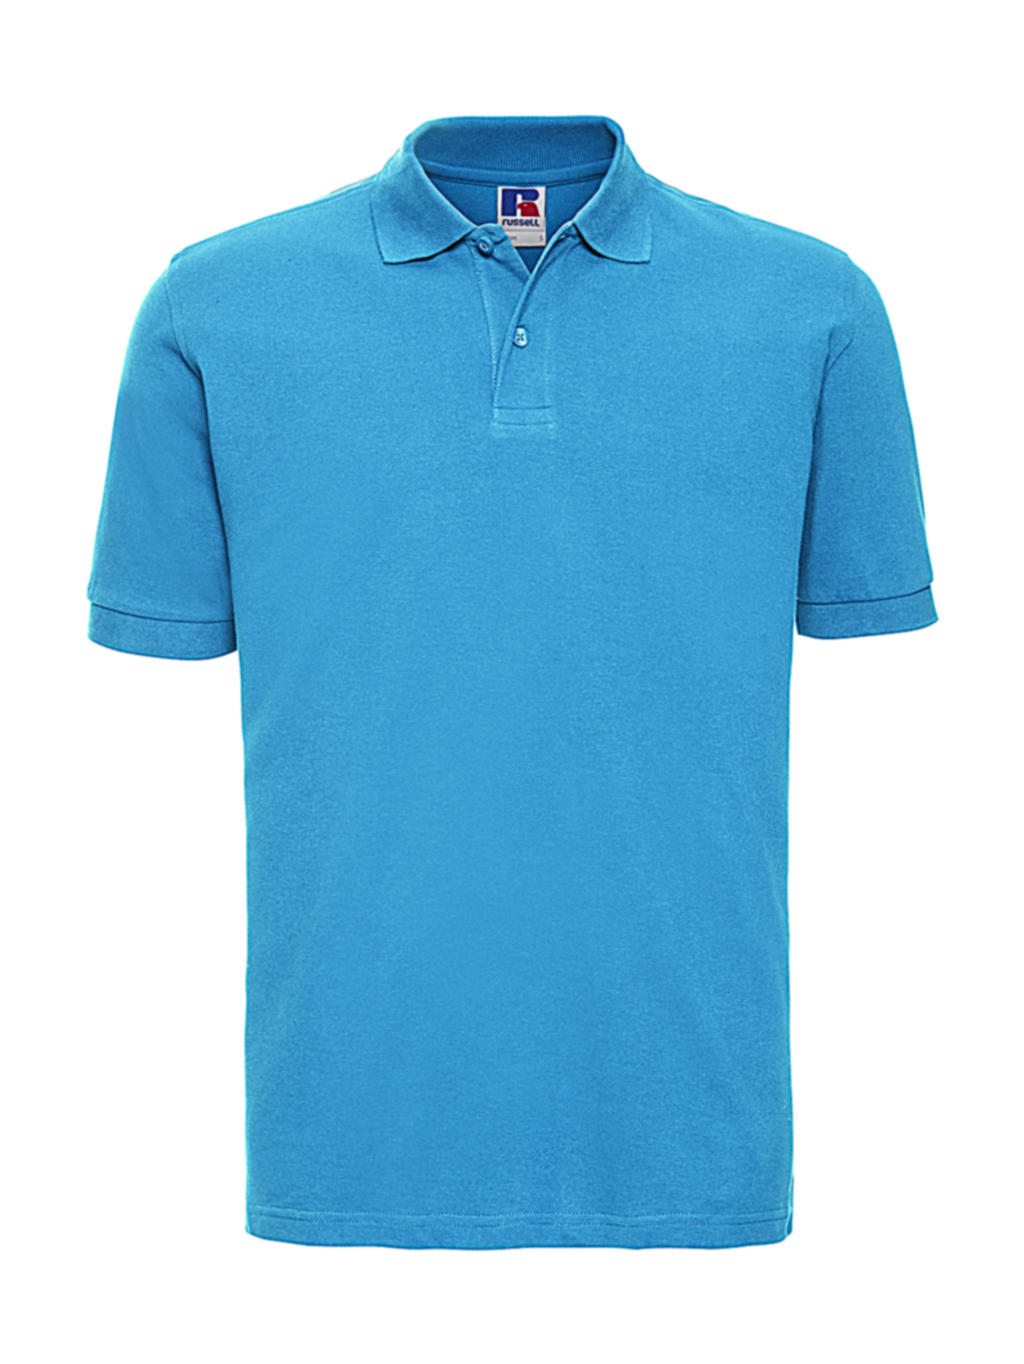  Mens Classic Cotton Polo in Farbe Turquoise